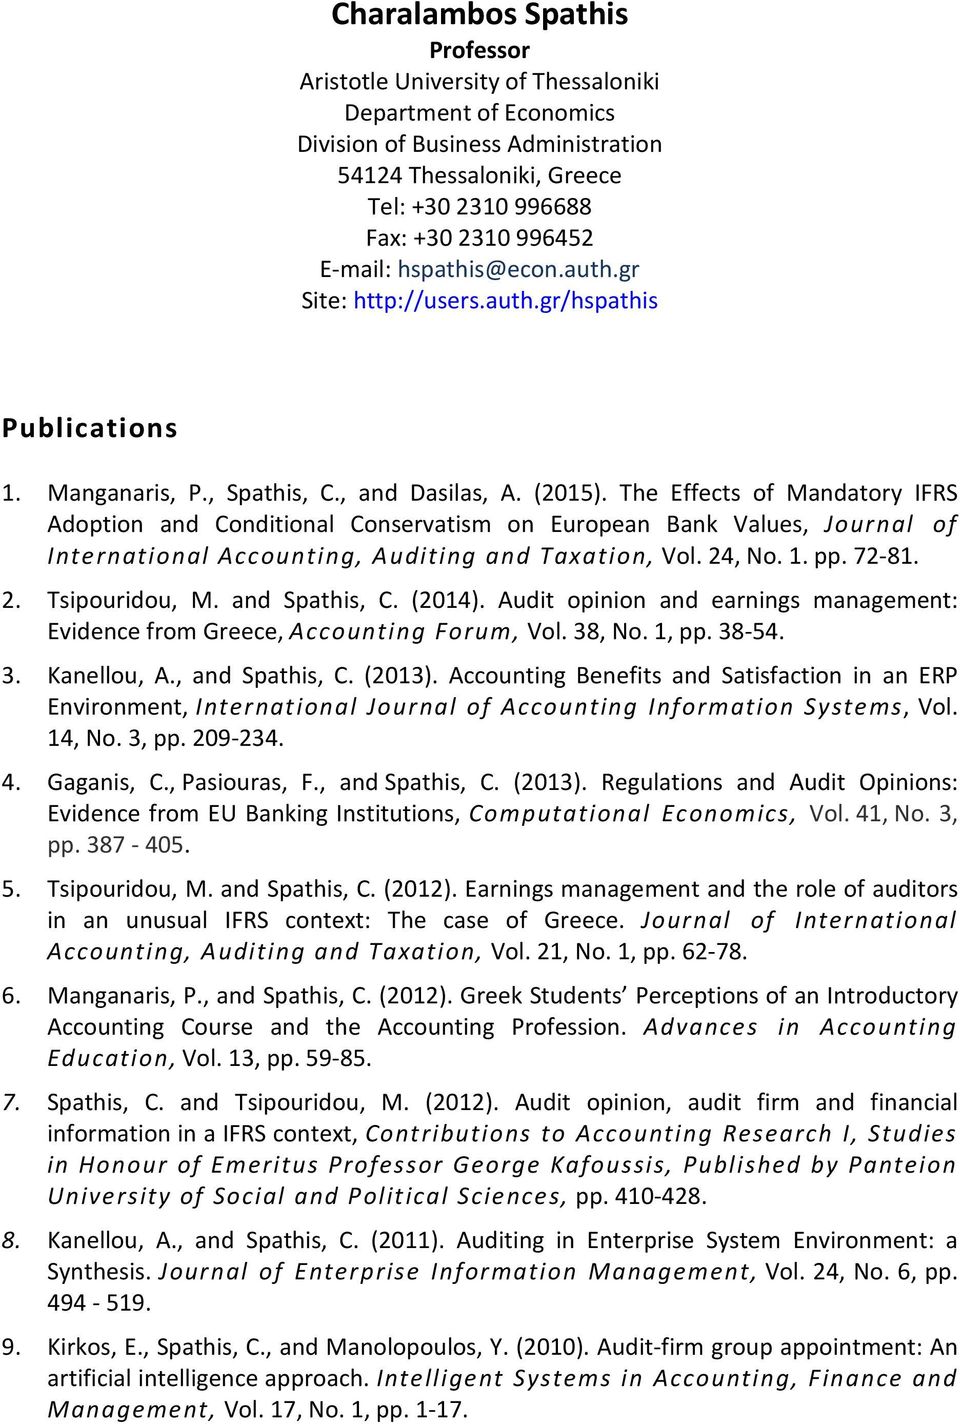 The Effects of Mandatory IFRS Adoption and Conditional Conservatism on European Bank Values, Journal of International Accounting, Auditing and Taxation, Vol. 24, No. 1. pp. 72-81. 2. Tsipouridou, M.